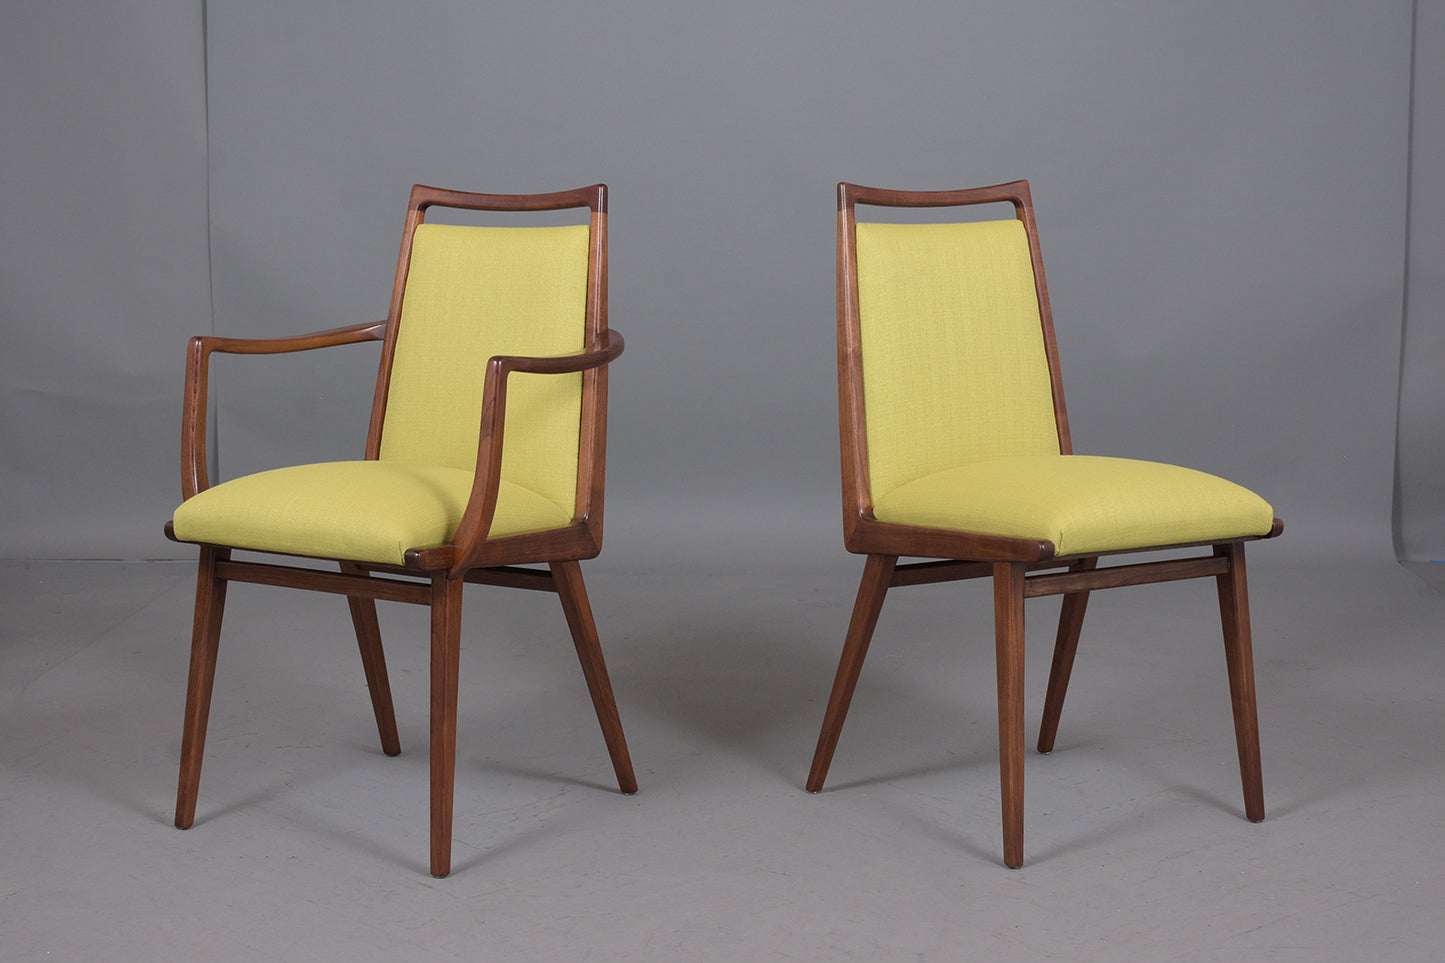 Set of Six Mid-Century Dining Room Chairs